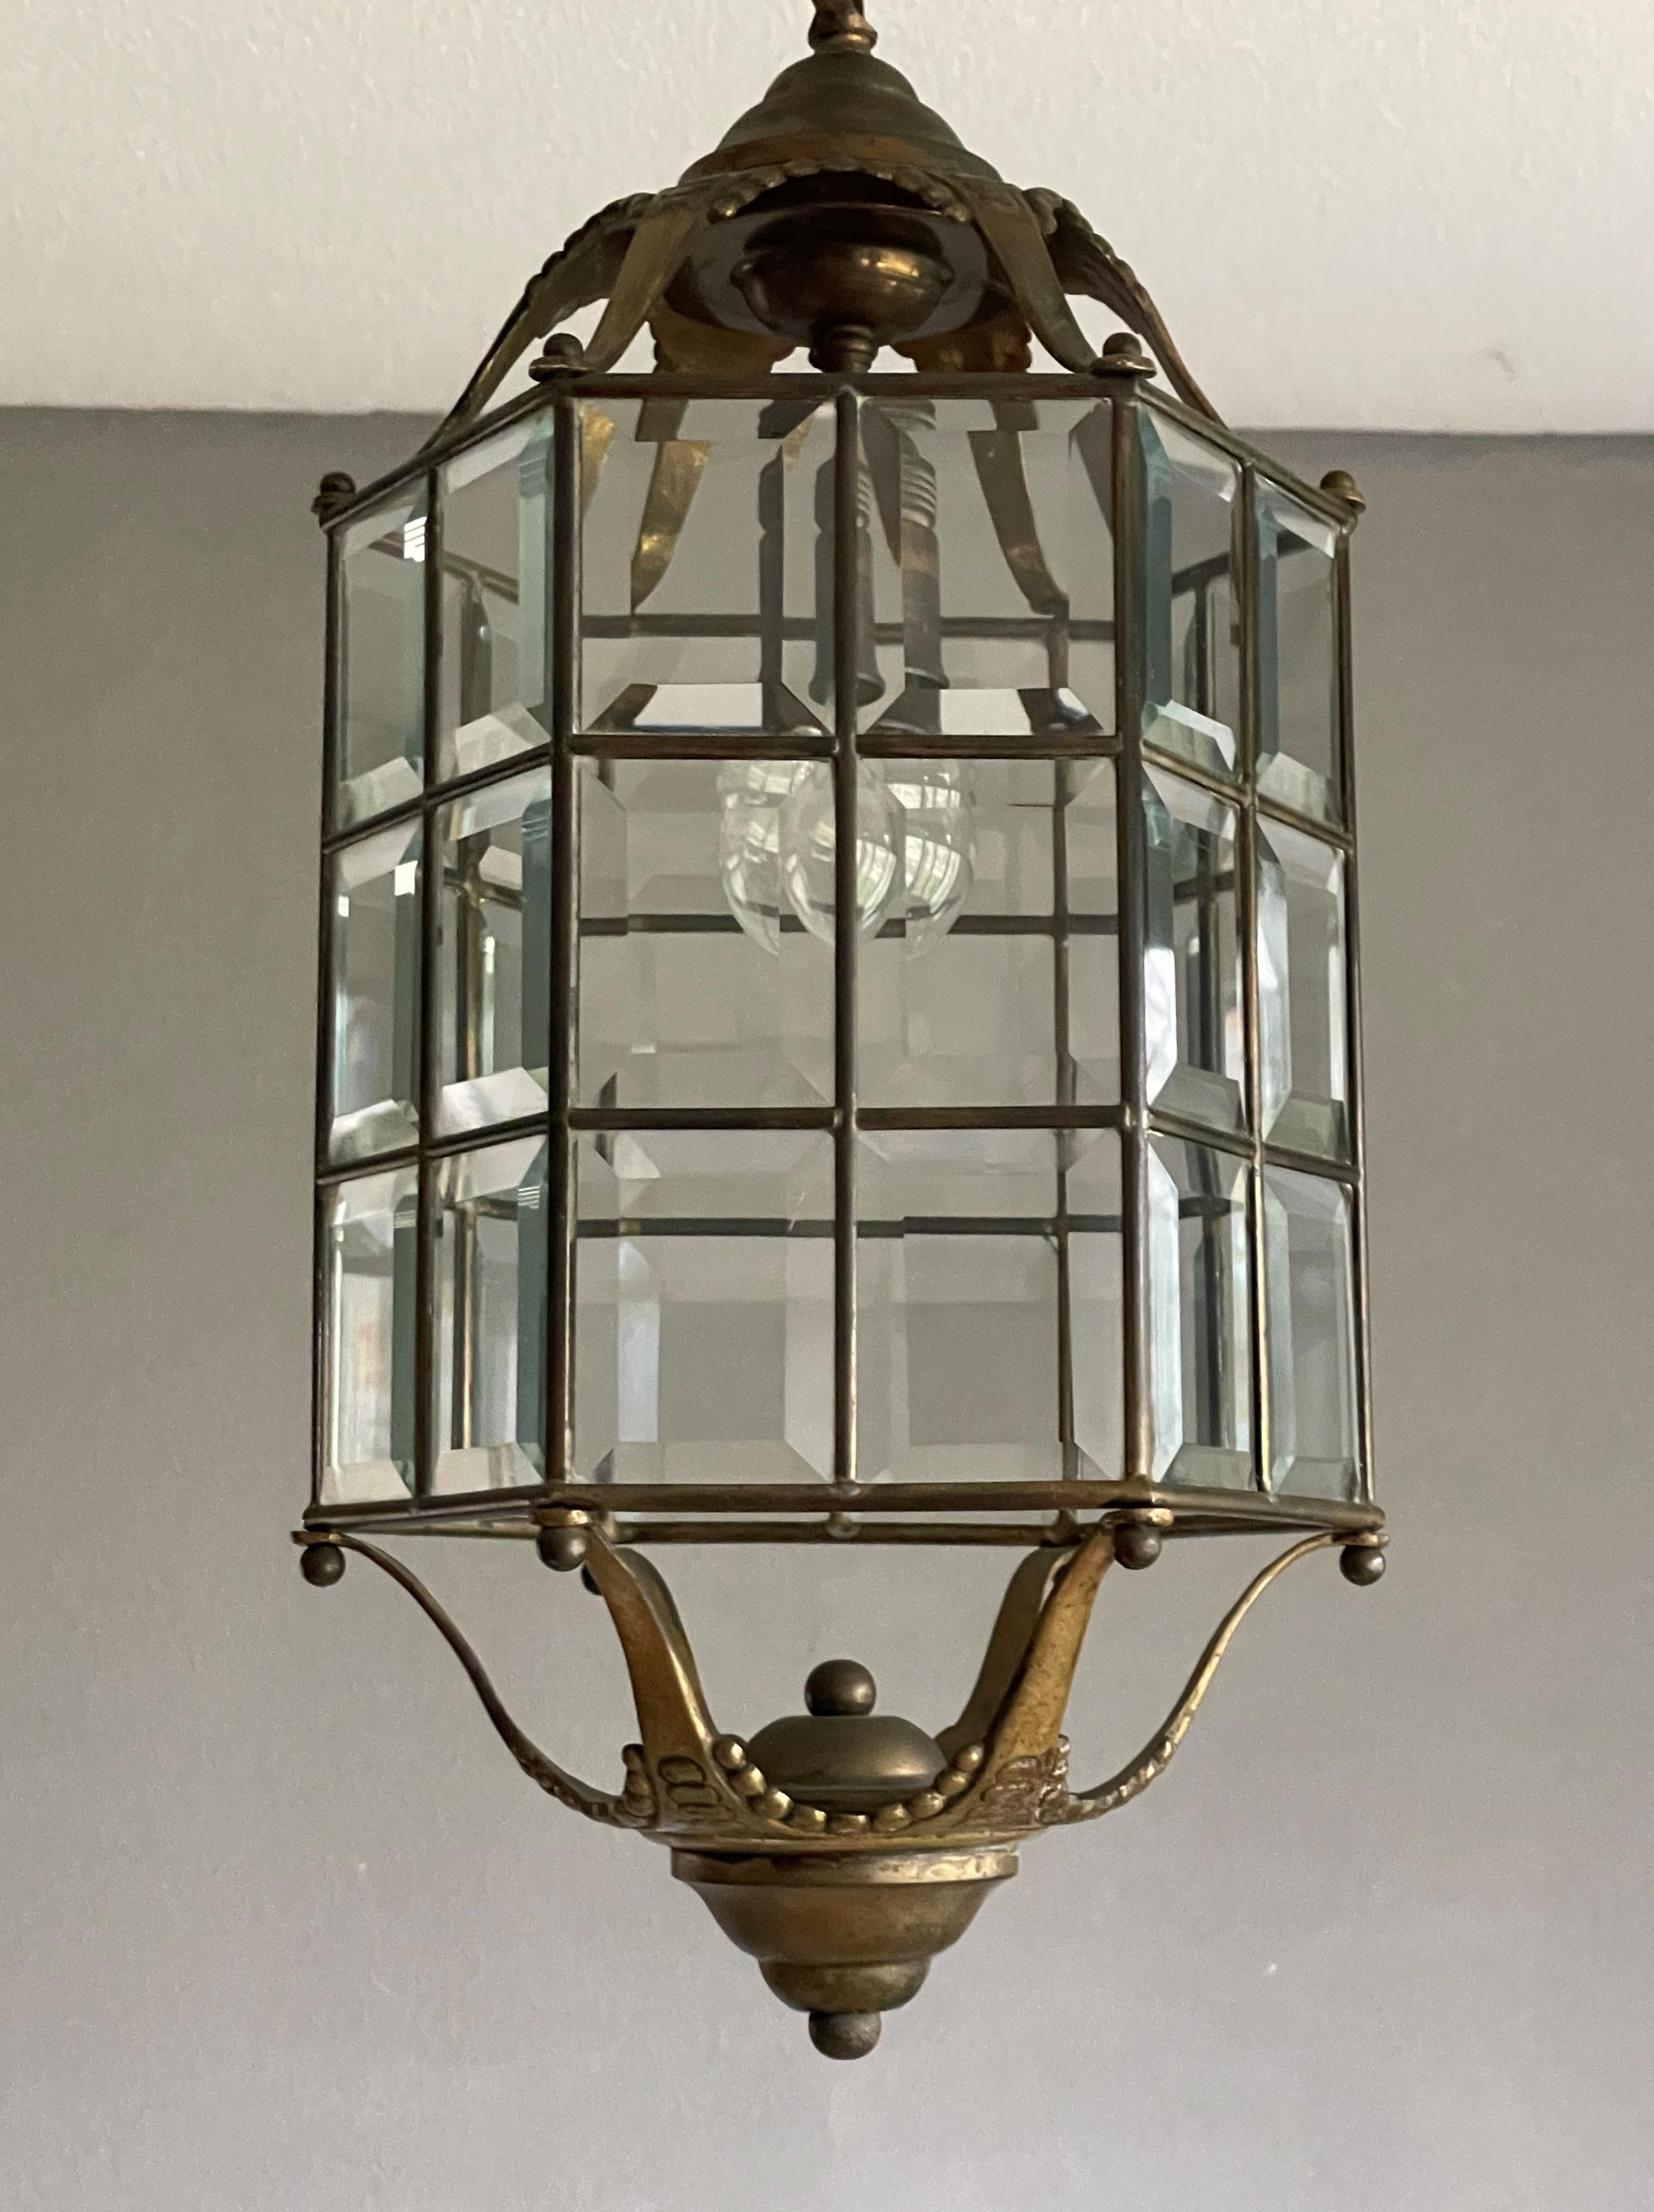 Good size and highly stylish antique entry hall lantern / pendant.

Having been specialised in selling antique light fixtures for over 20 years we love to keep finding amazing fixtures that we have never seen before. This marvelously hand-crafted